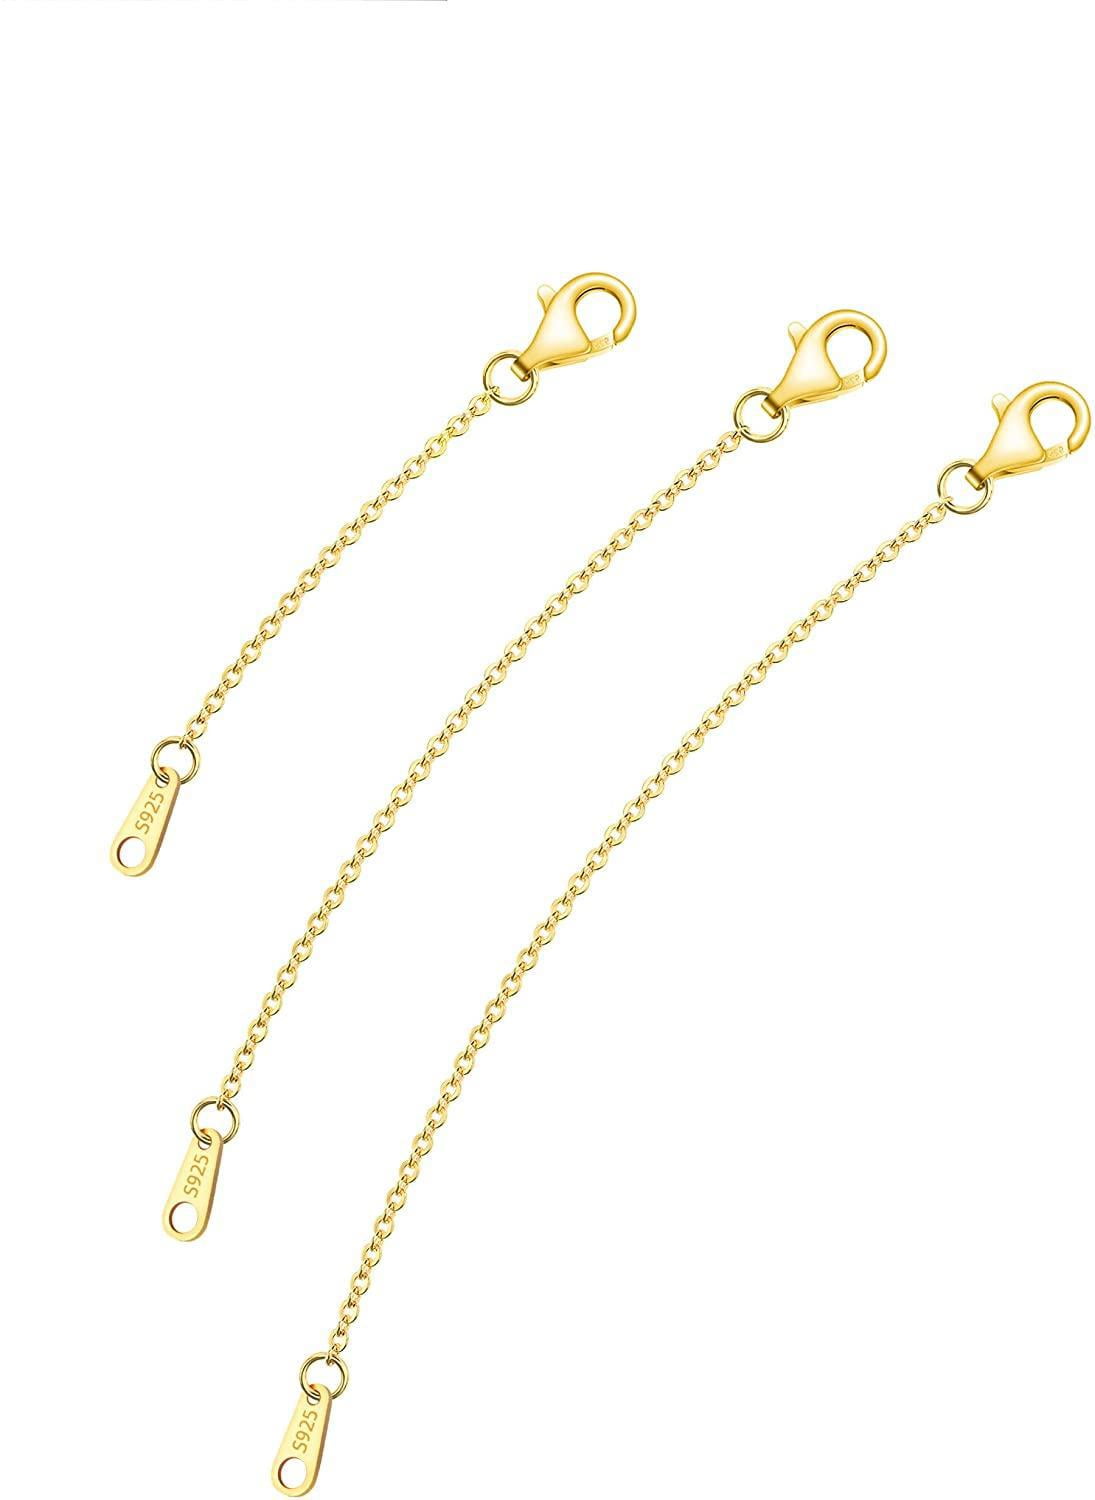  Necklace Extender, 12 PCS Chain Extenders for Necklaces,  Premium Stainless Steel Jewelry Bracelet Anklet Necklace Extenders (6 Gold,  6 Silver), Length: 1 2 3 4 5 6, by UUBAAR : Clothing